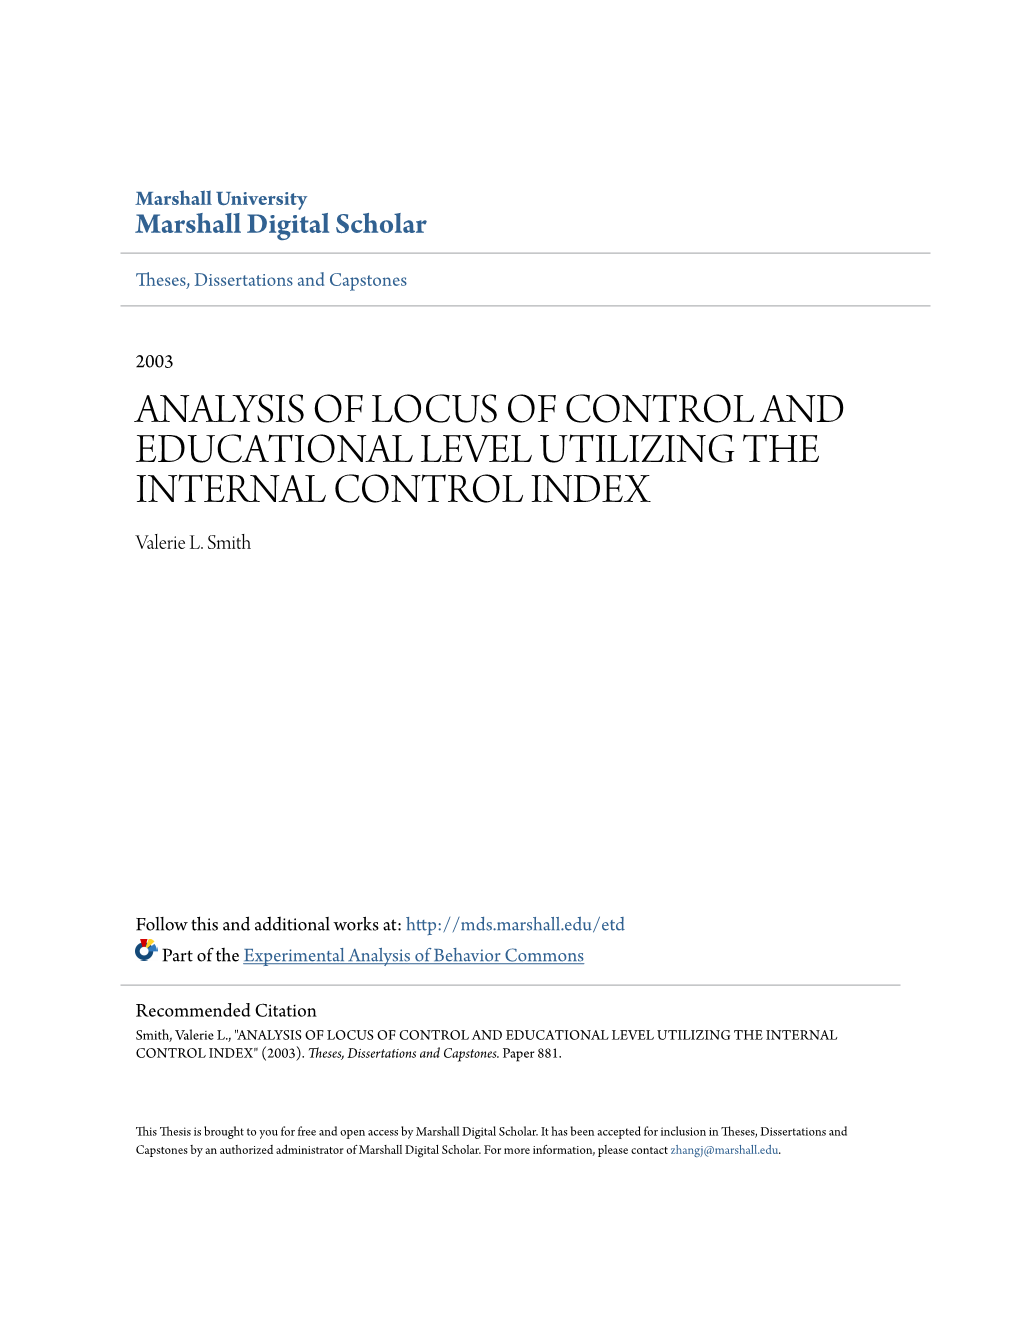 ANALYSIS of LOCUS of CONTROL and EDUCATIONAL LEVEL UTILIZING the INTERNAL CONTROL INDEX Valerie L